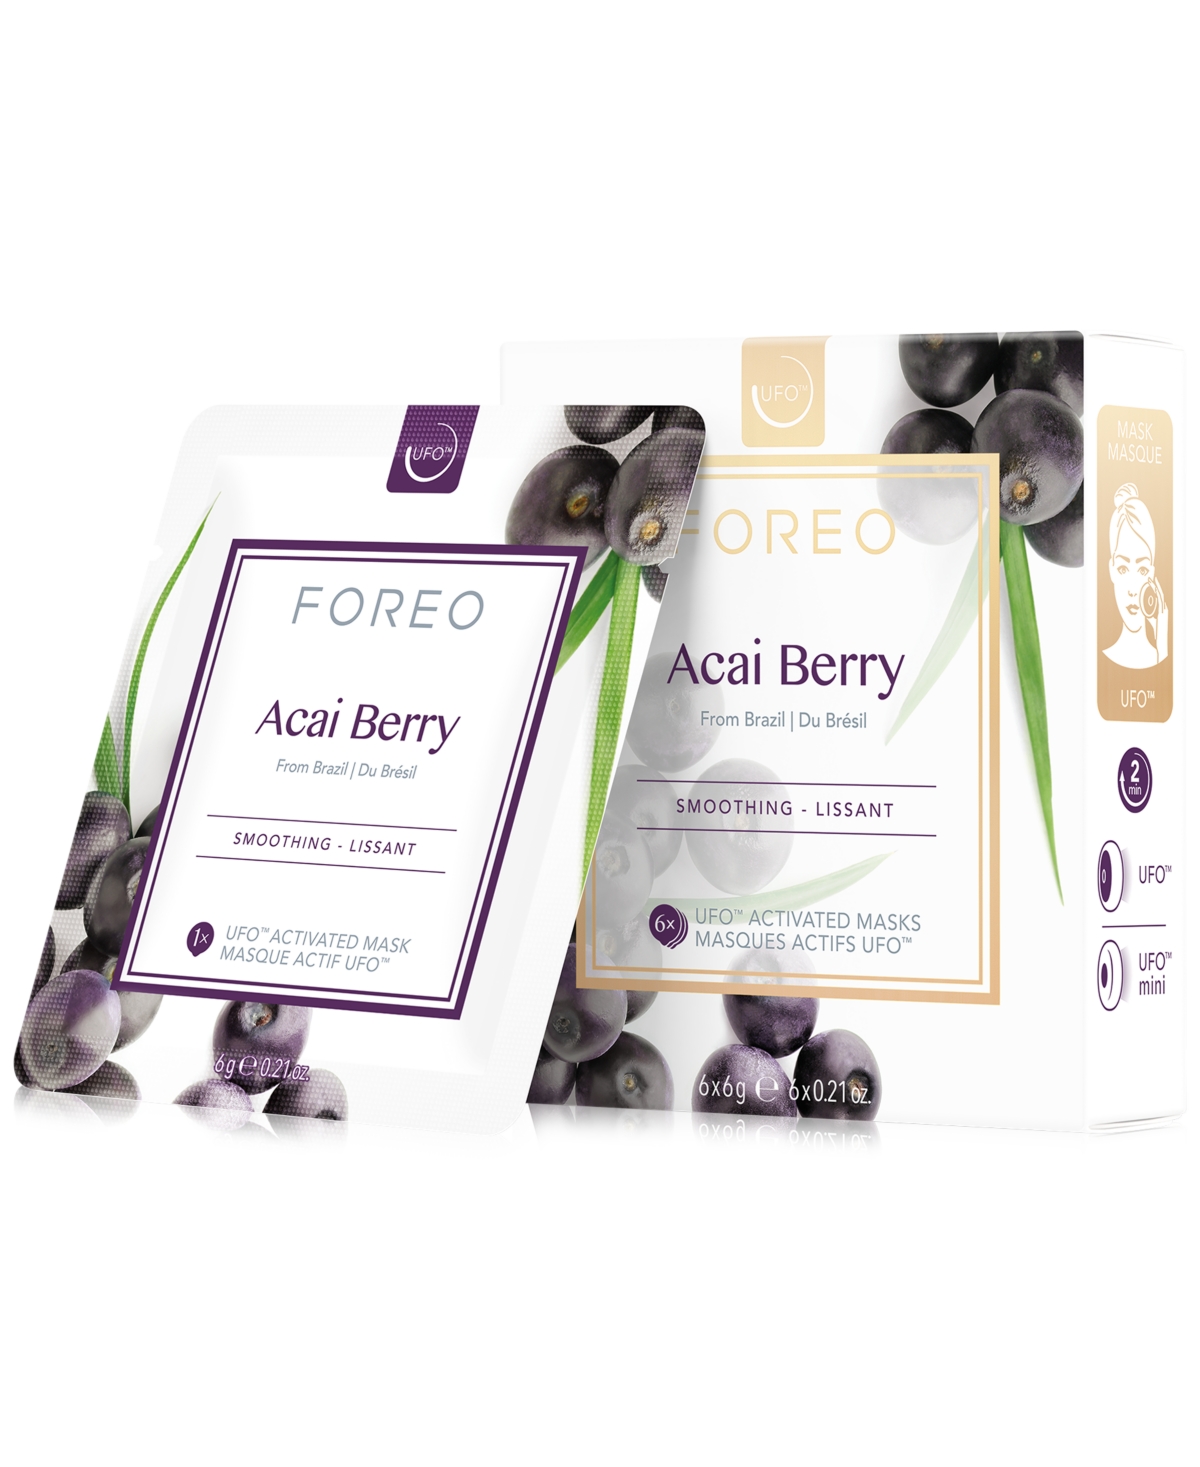 Acai Berry Ufo Activated Masks